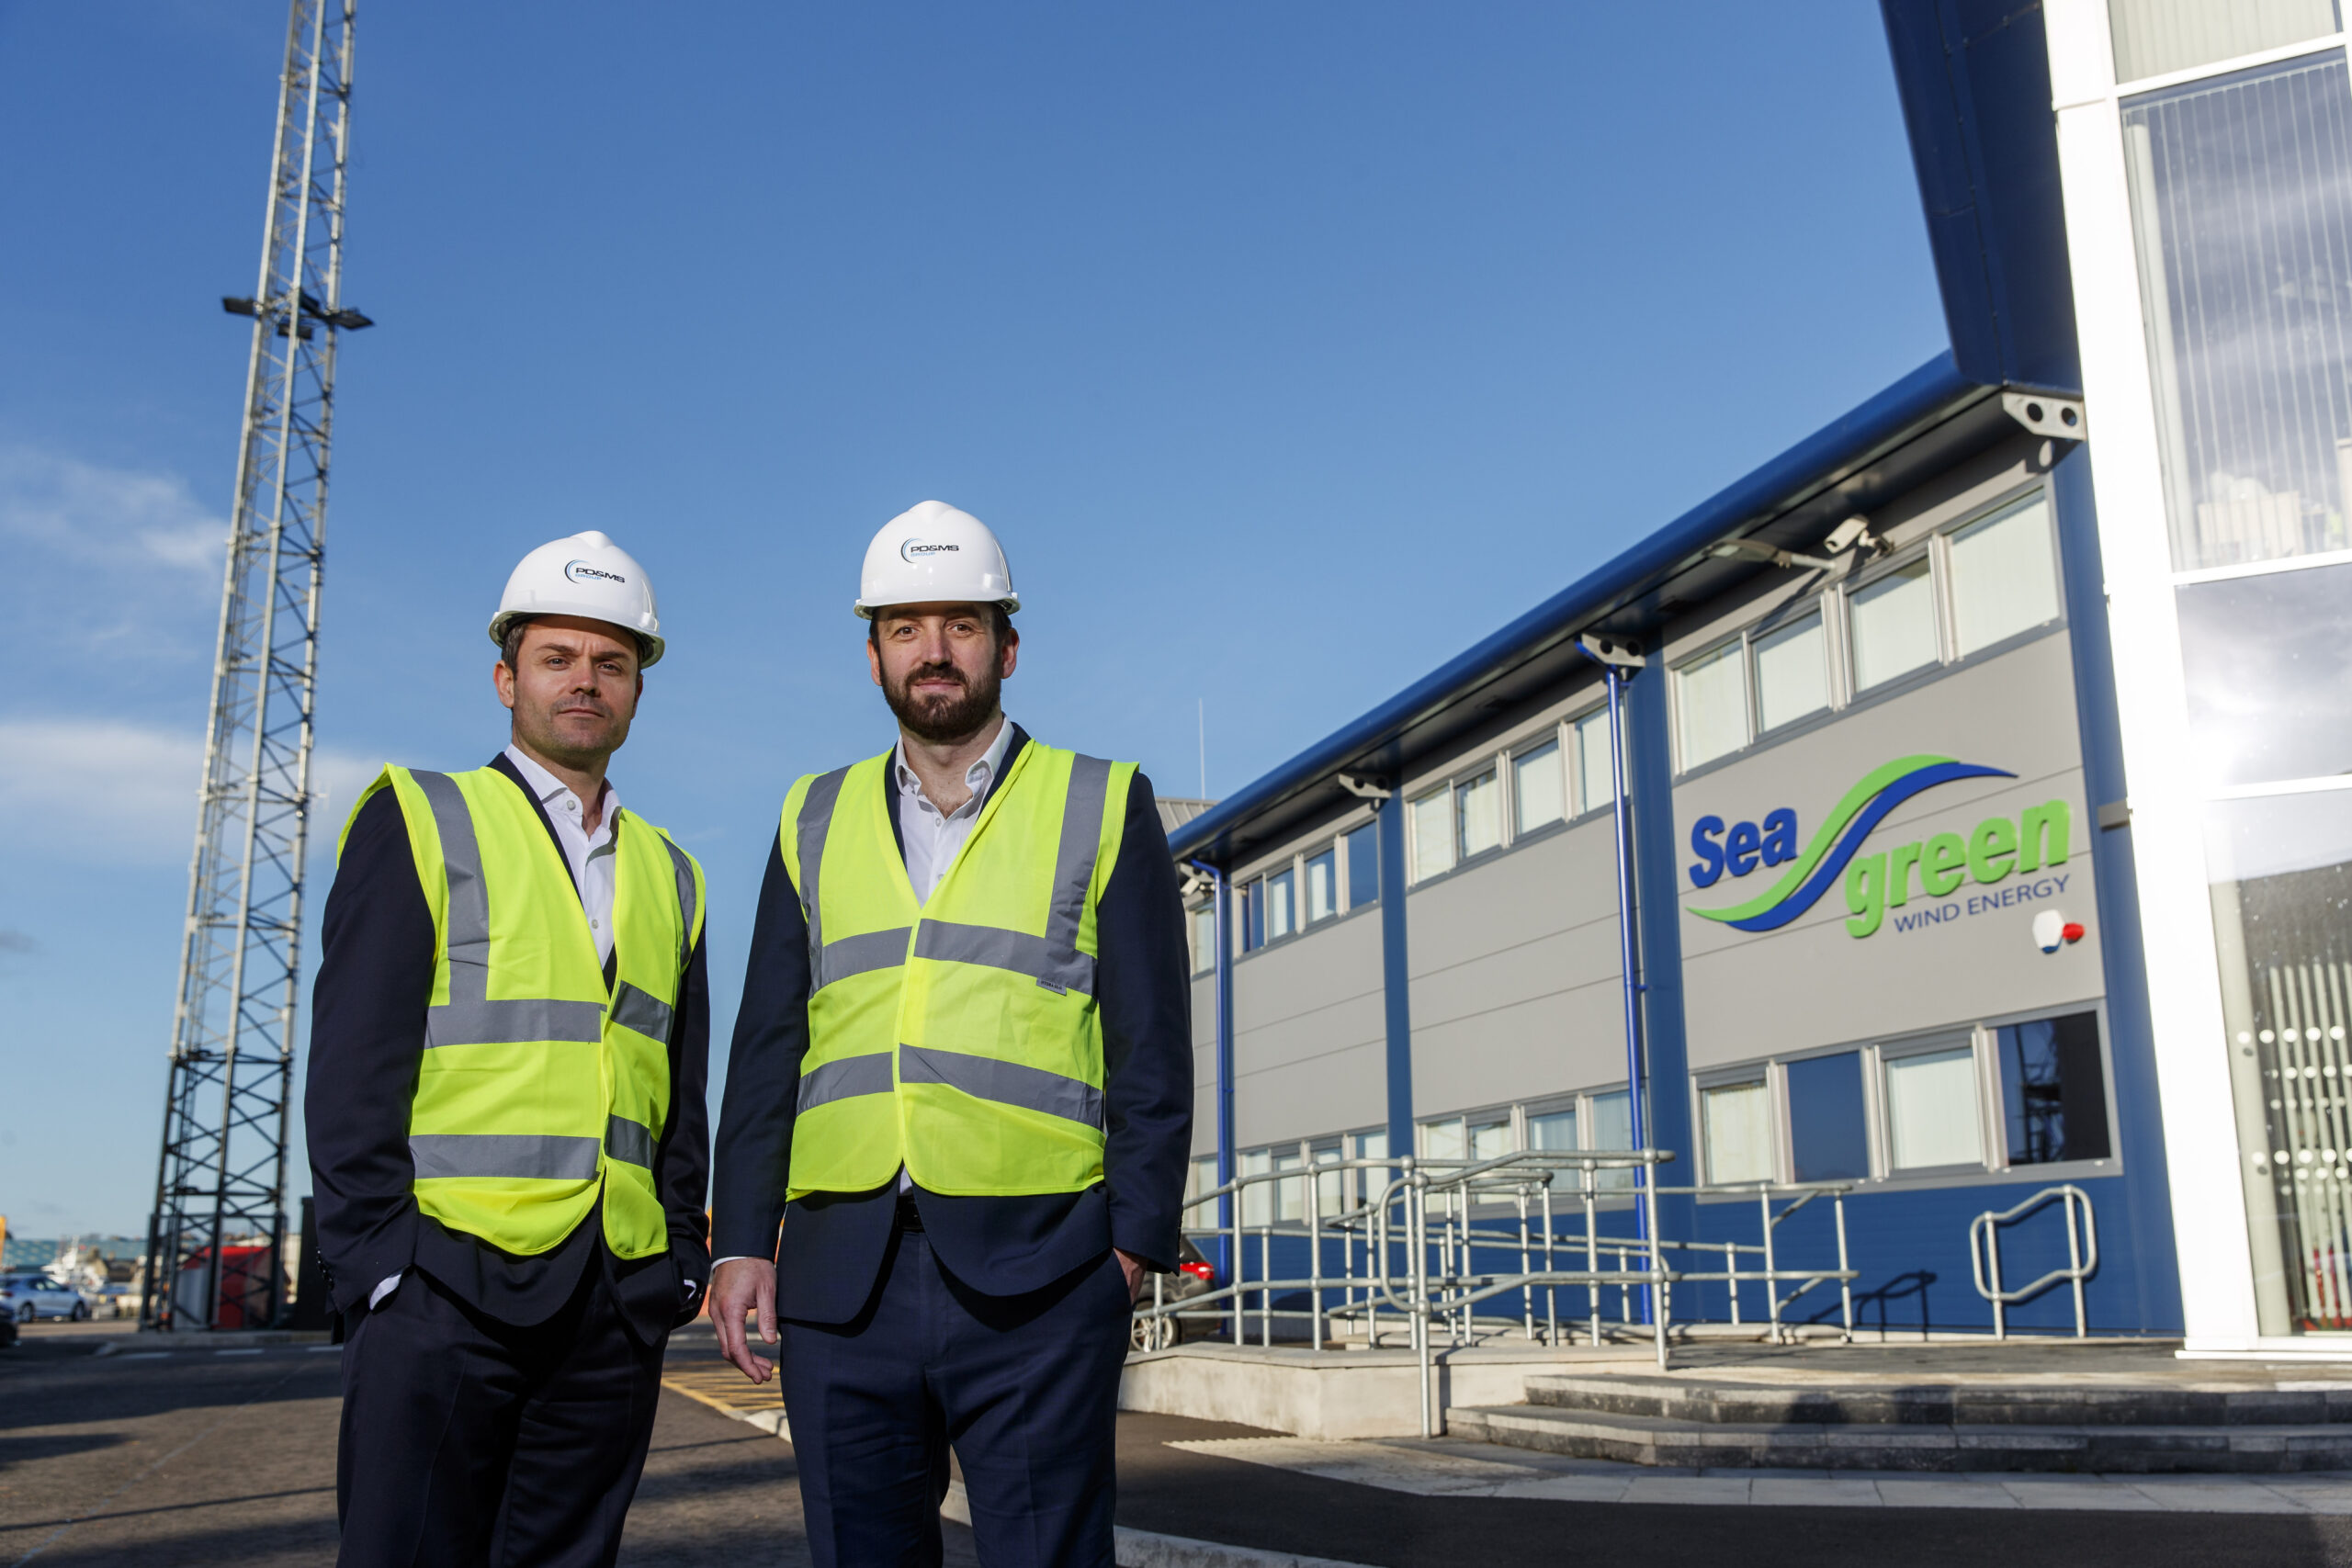 MEMBER NEWS: PD&MS awarded three-year BoP framework agreement to support SSE Renewables at the Seagreen Offshore Wind Farm